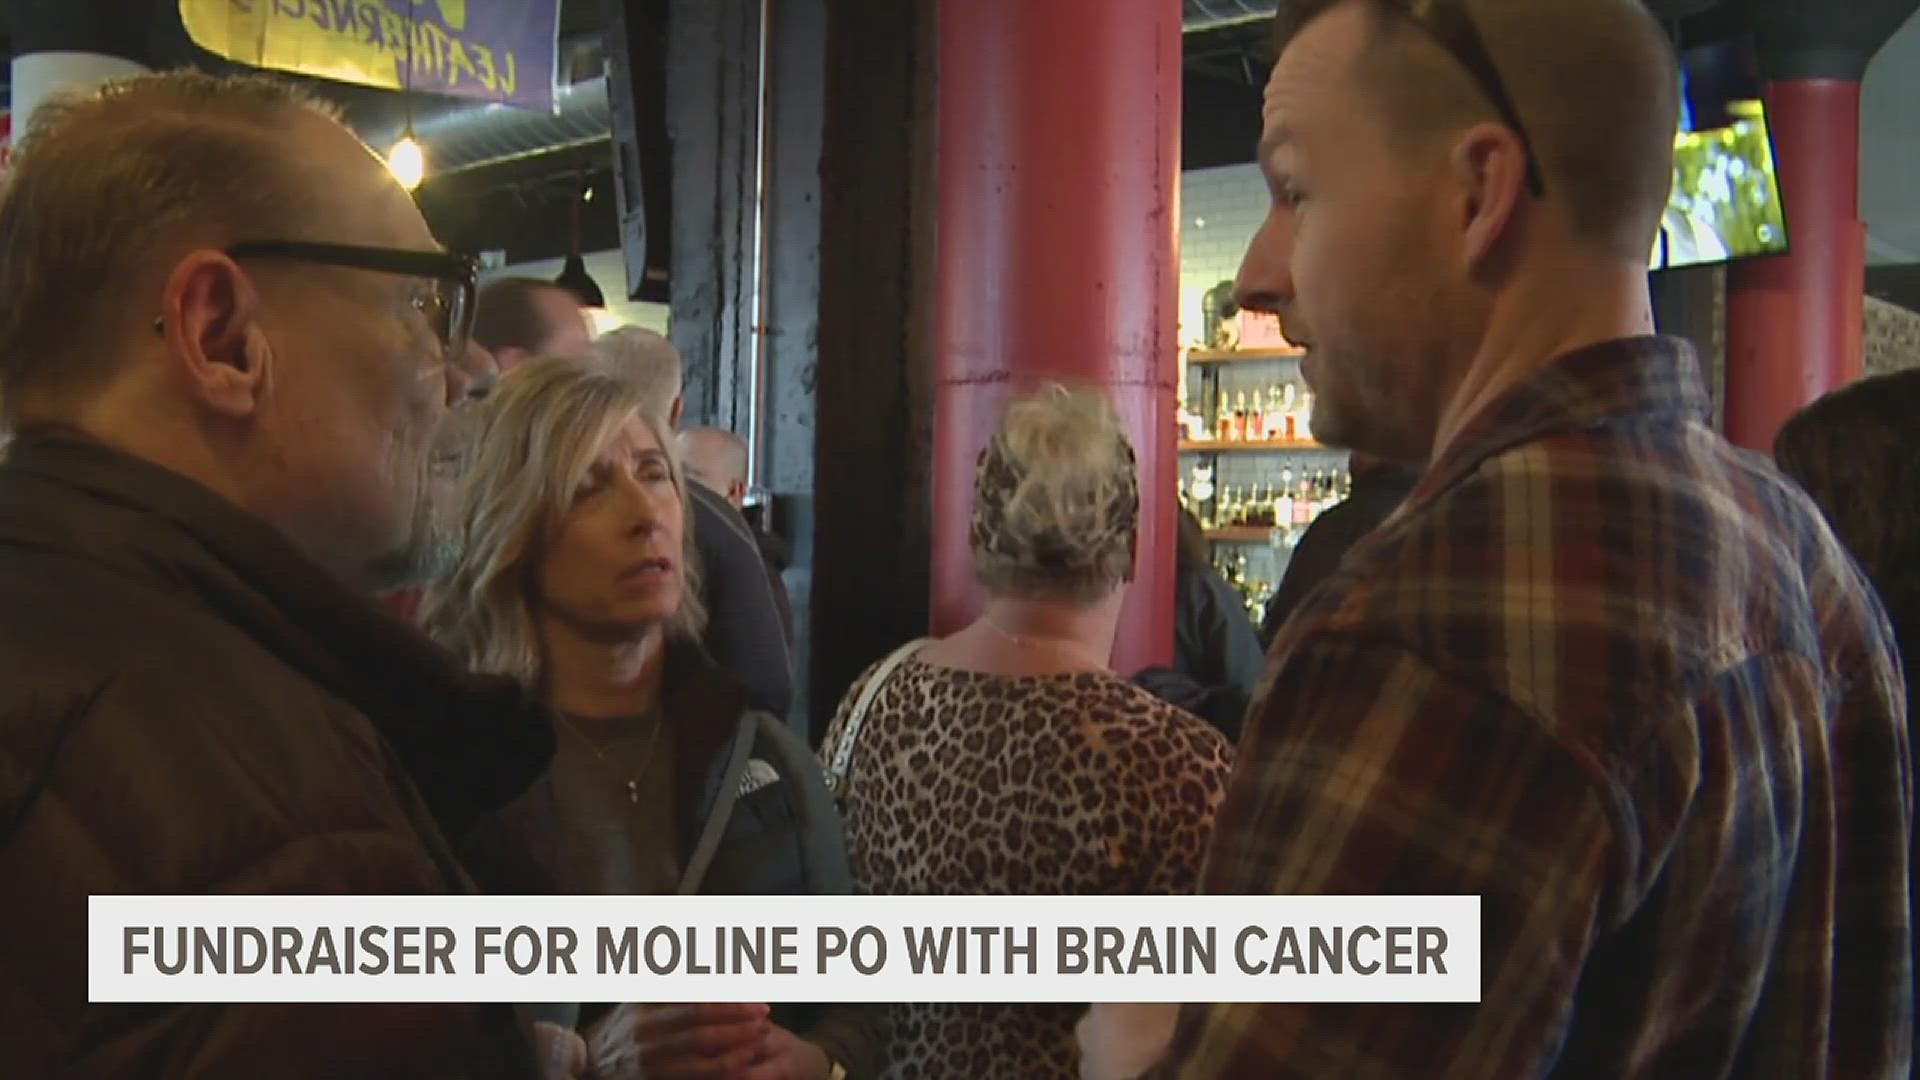 The City of Moline and its police department came together Wednesday to rally for one of their own in a battle with brain cancer.